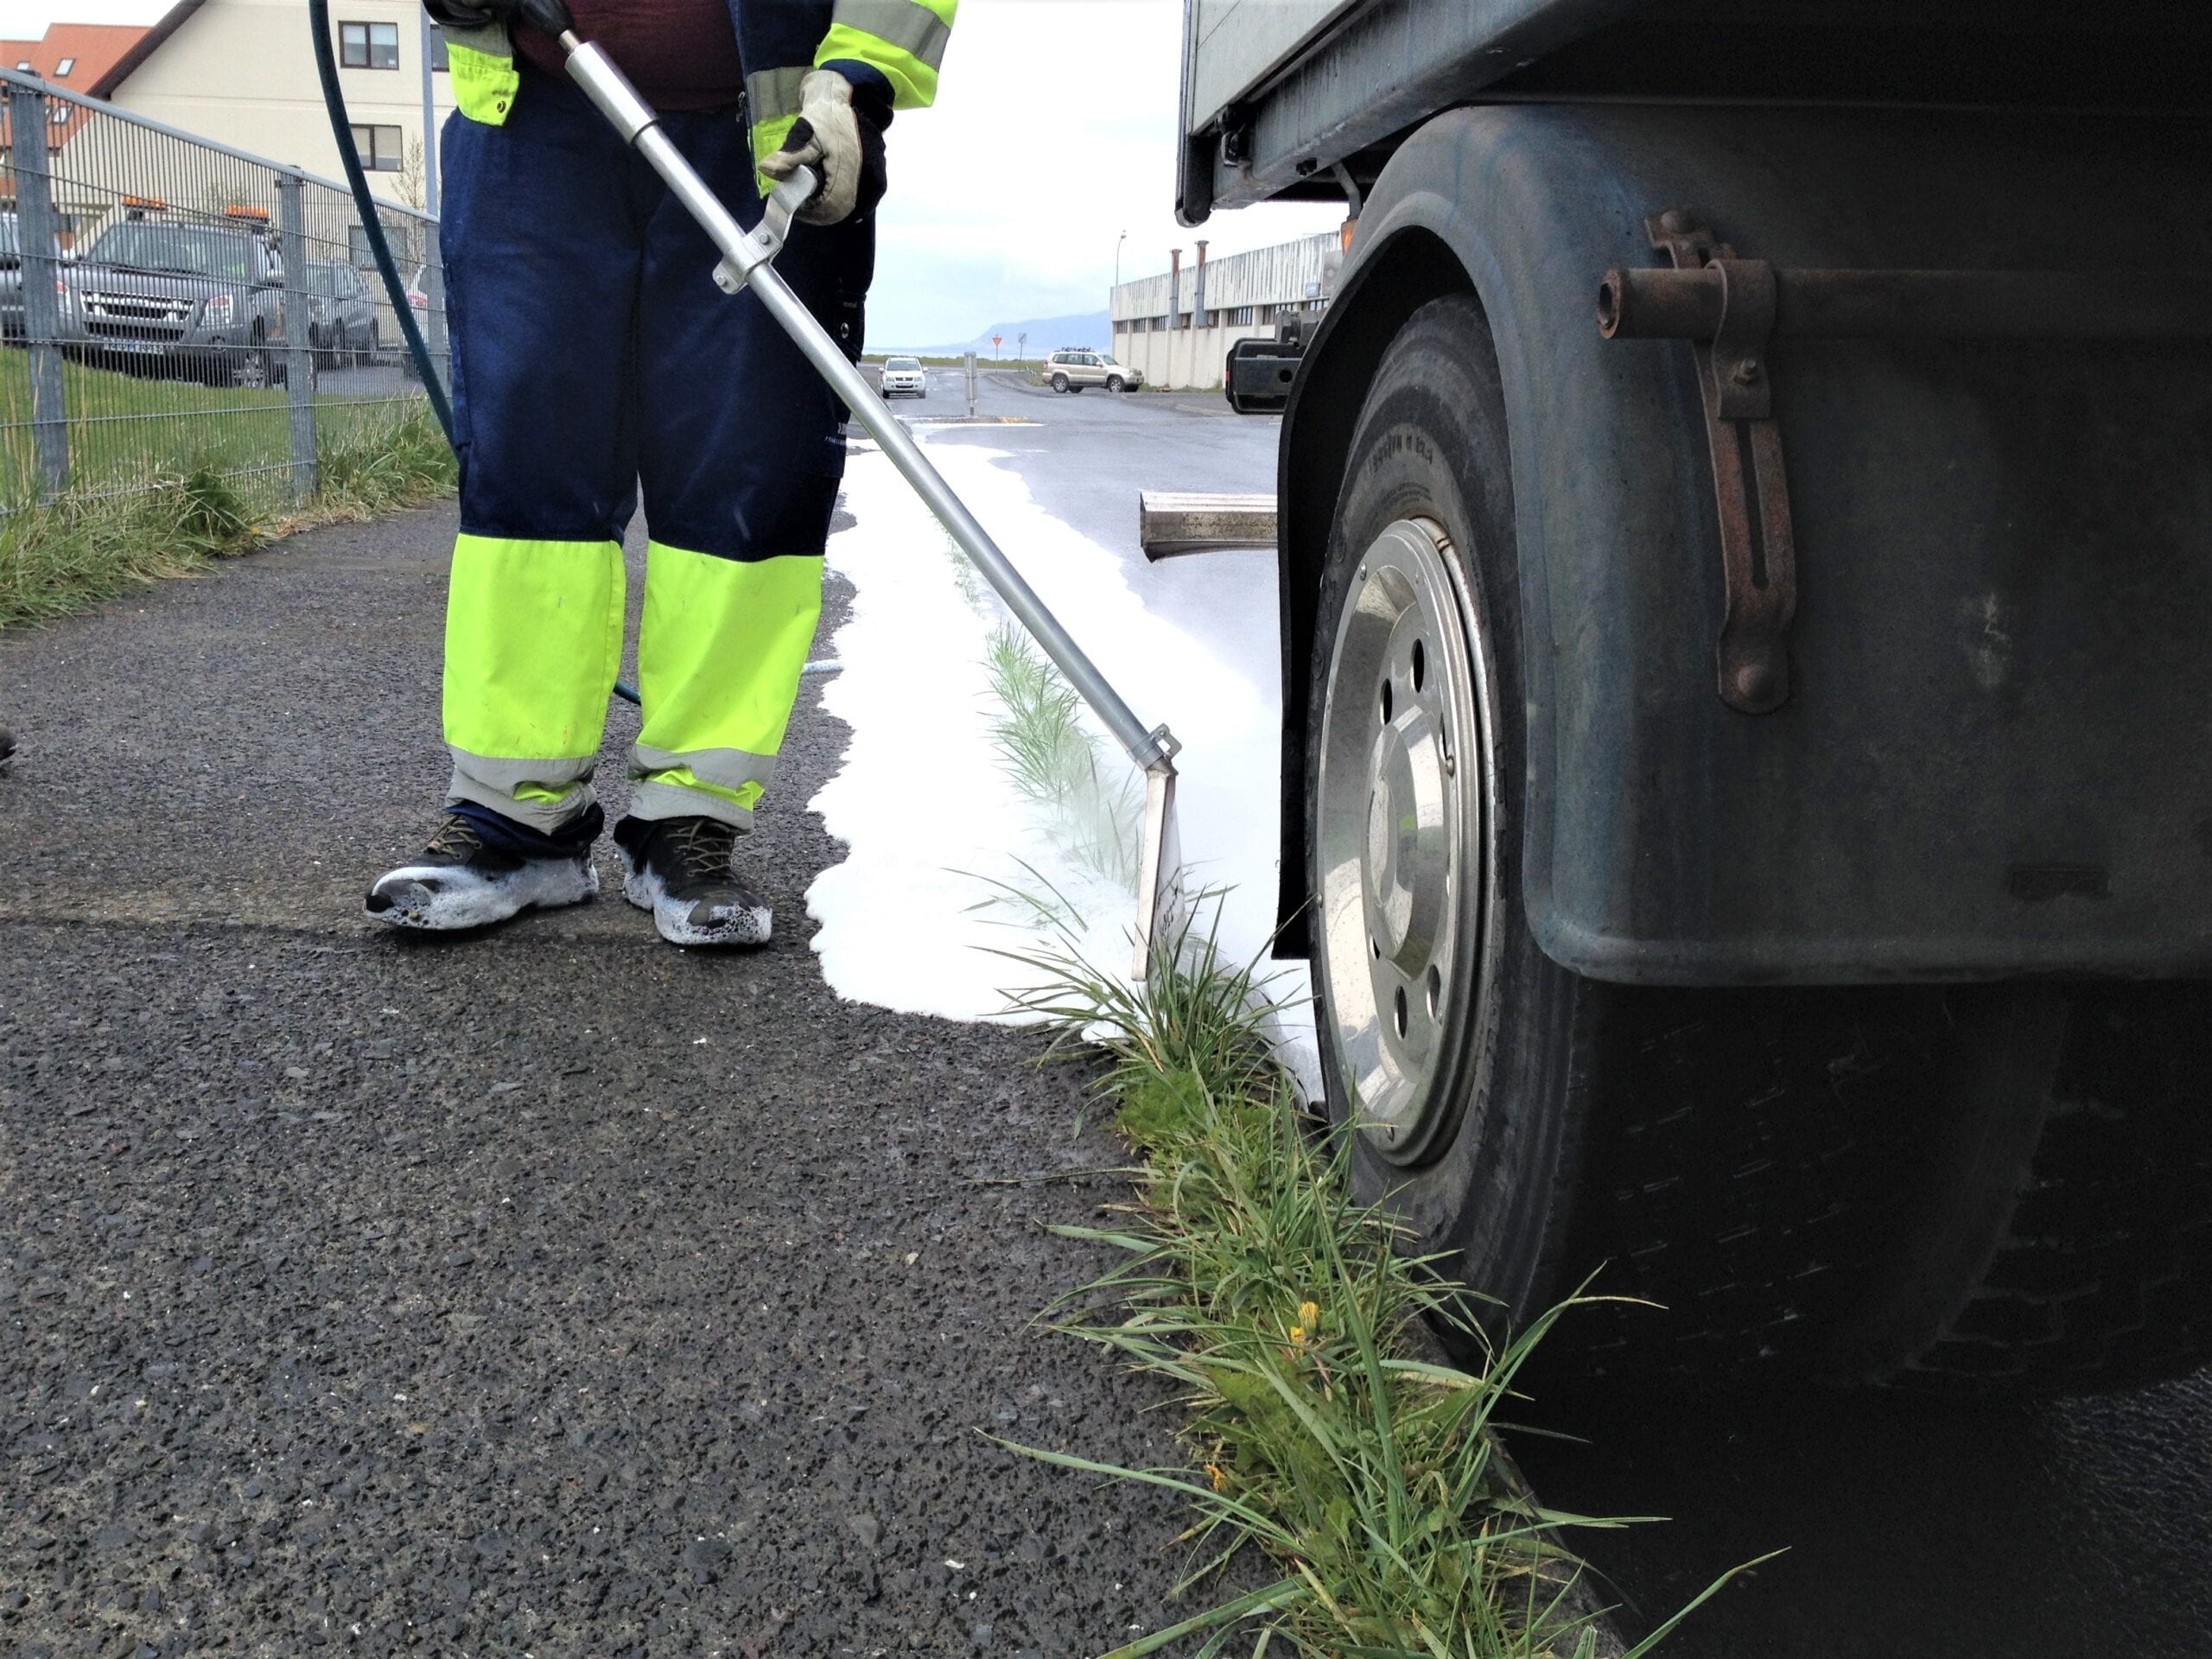 SPUMA - efficient and sustainable weed control - is used along the sidewalk to remove wild grass.